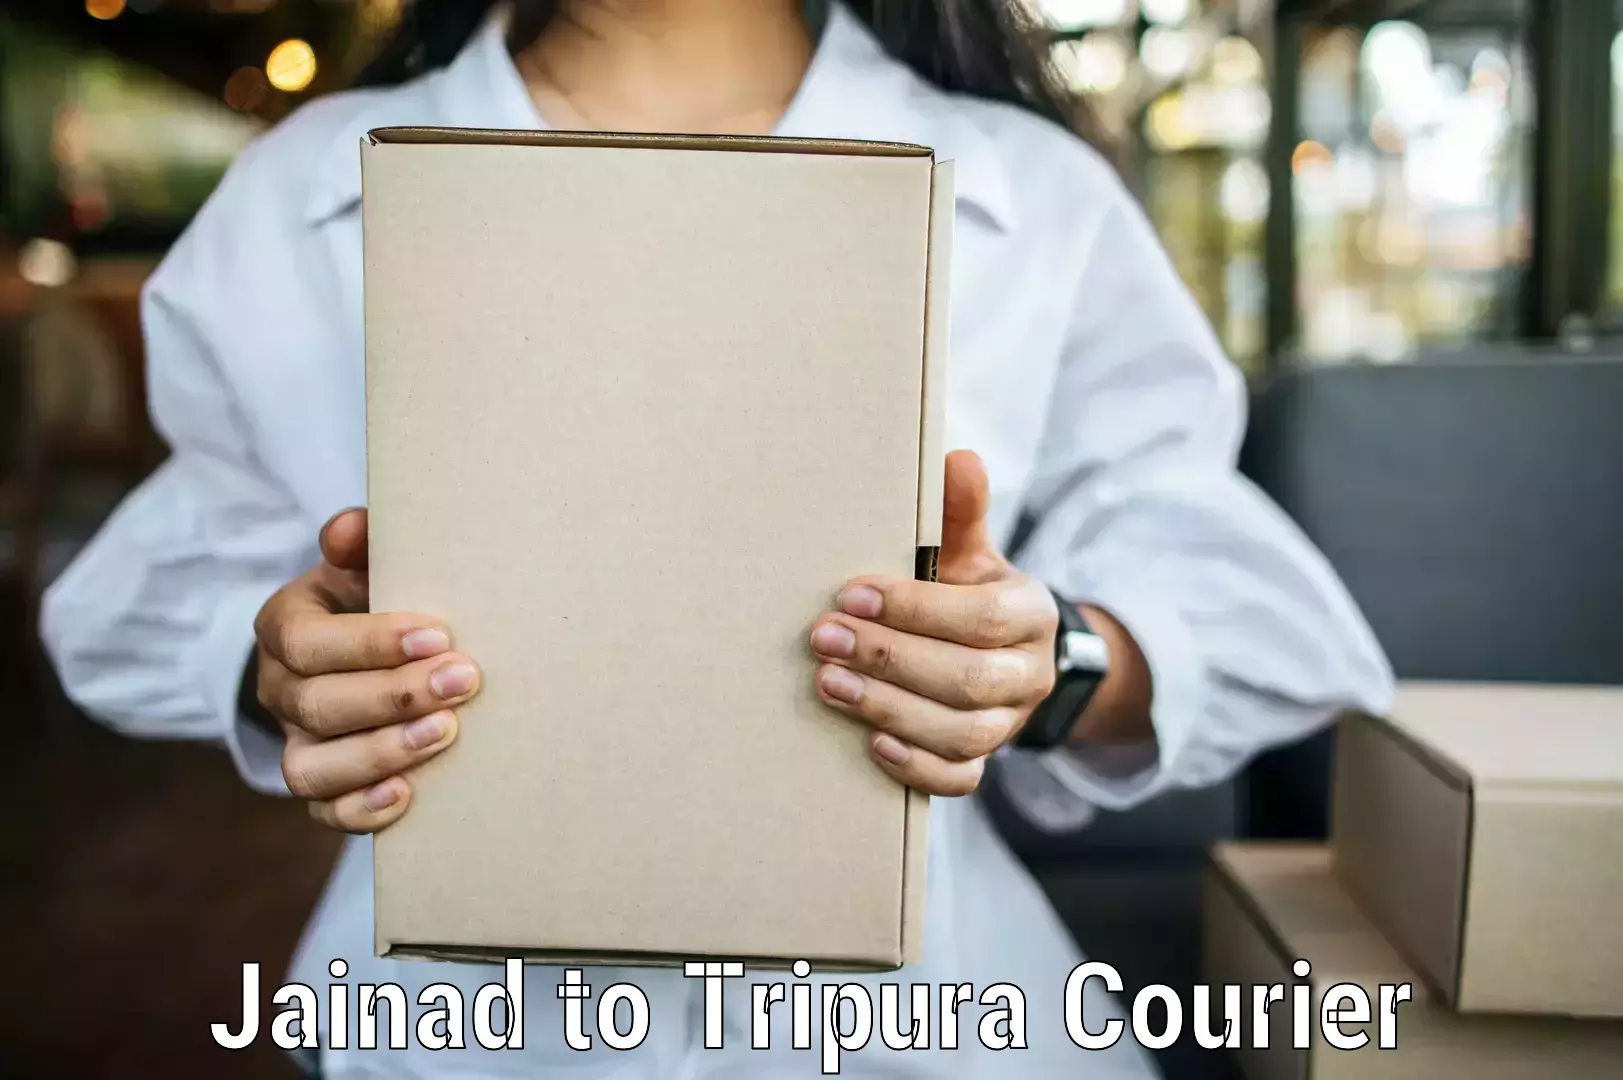 Subscription-based courier Jainad to North Tripura